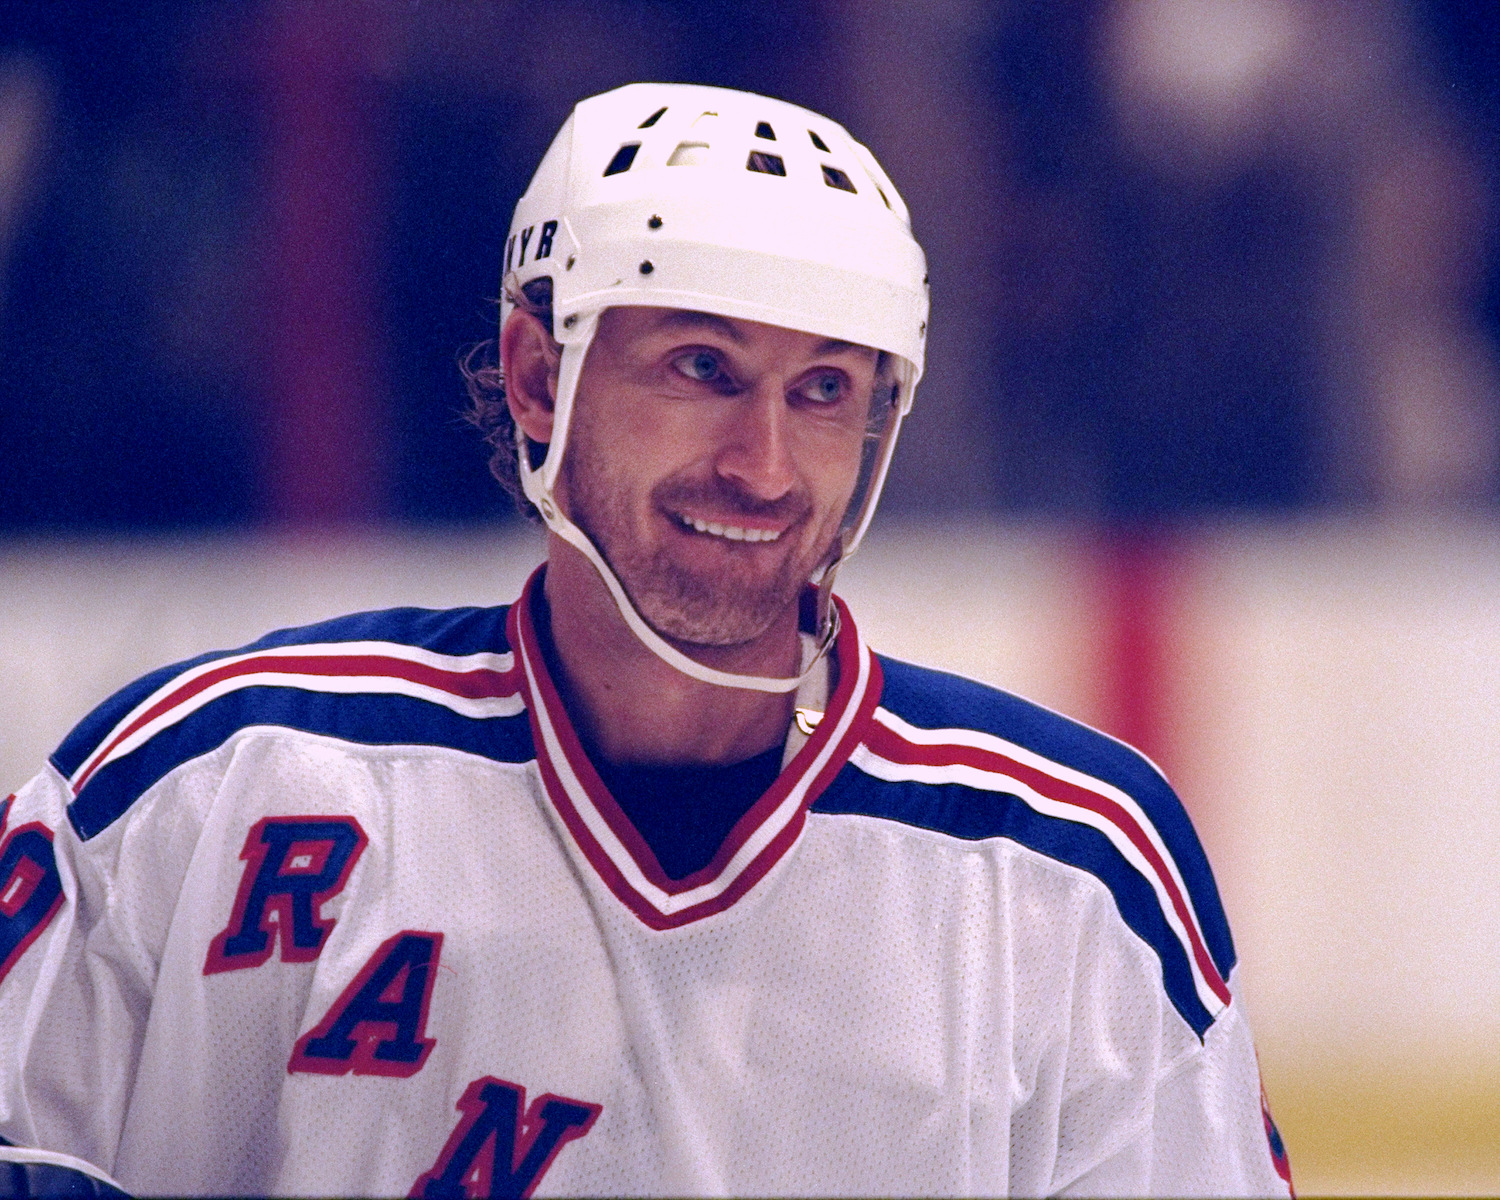 Wayne Gretzky Once Spent an NHL Practice Messing With a Hungover Teammate